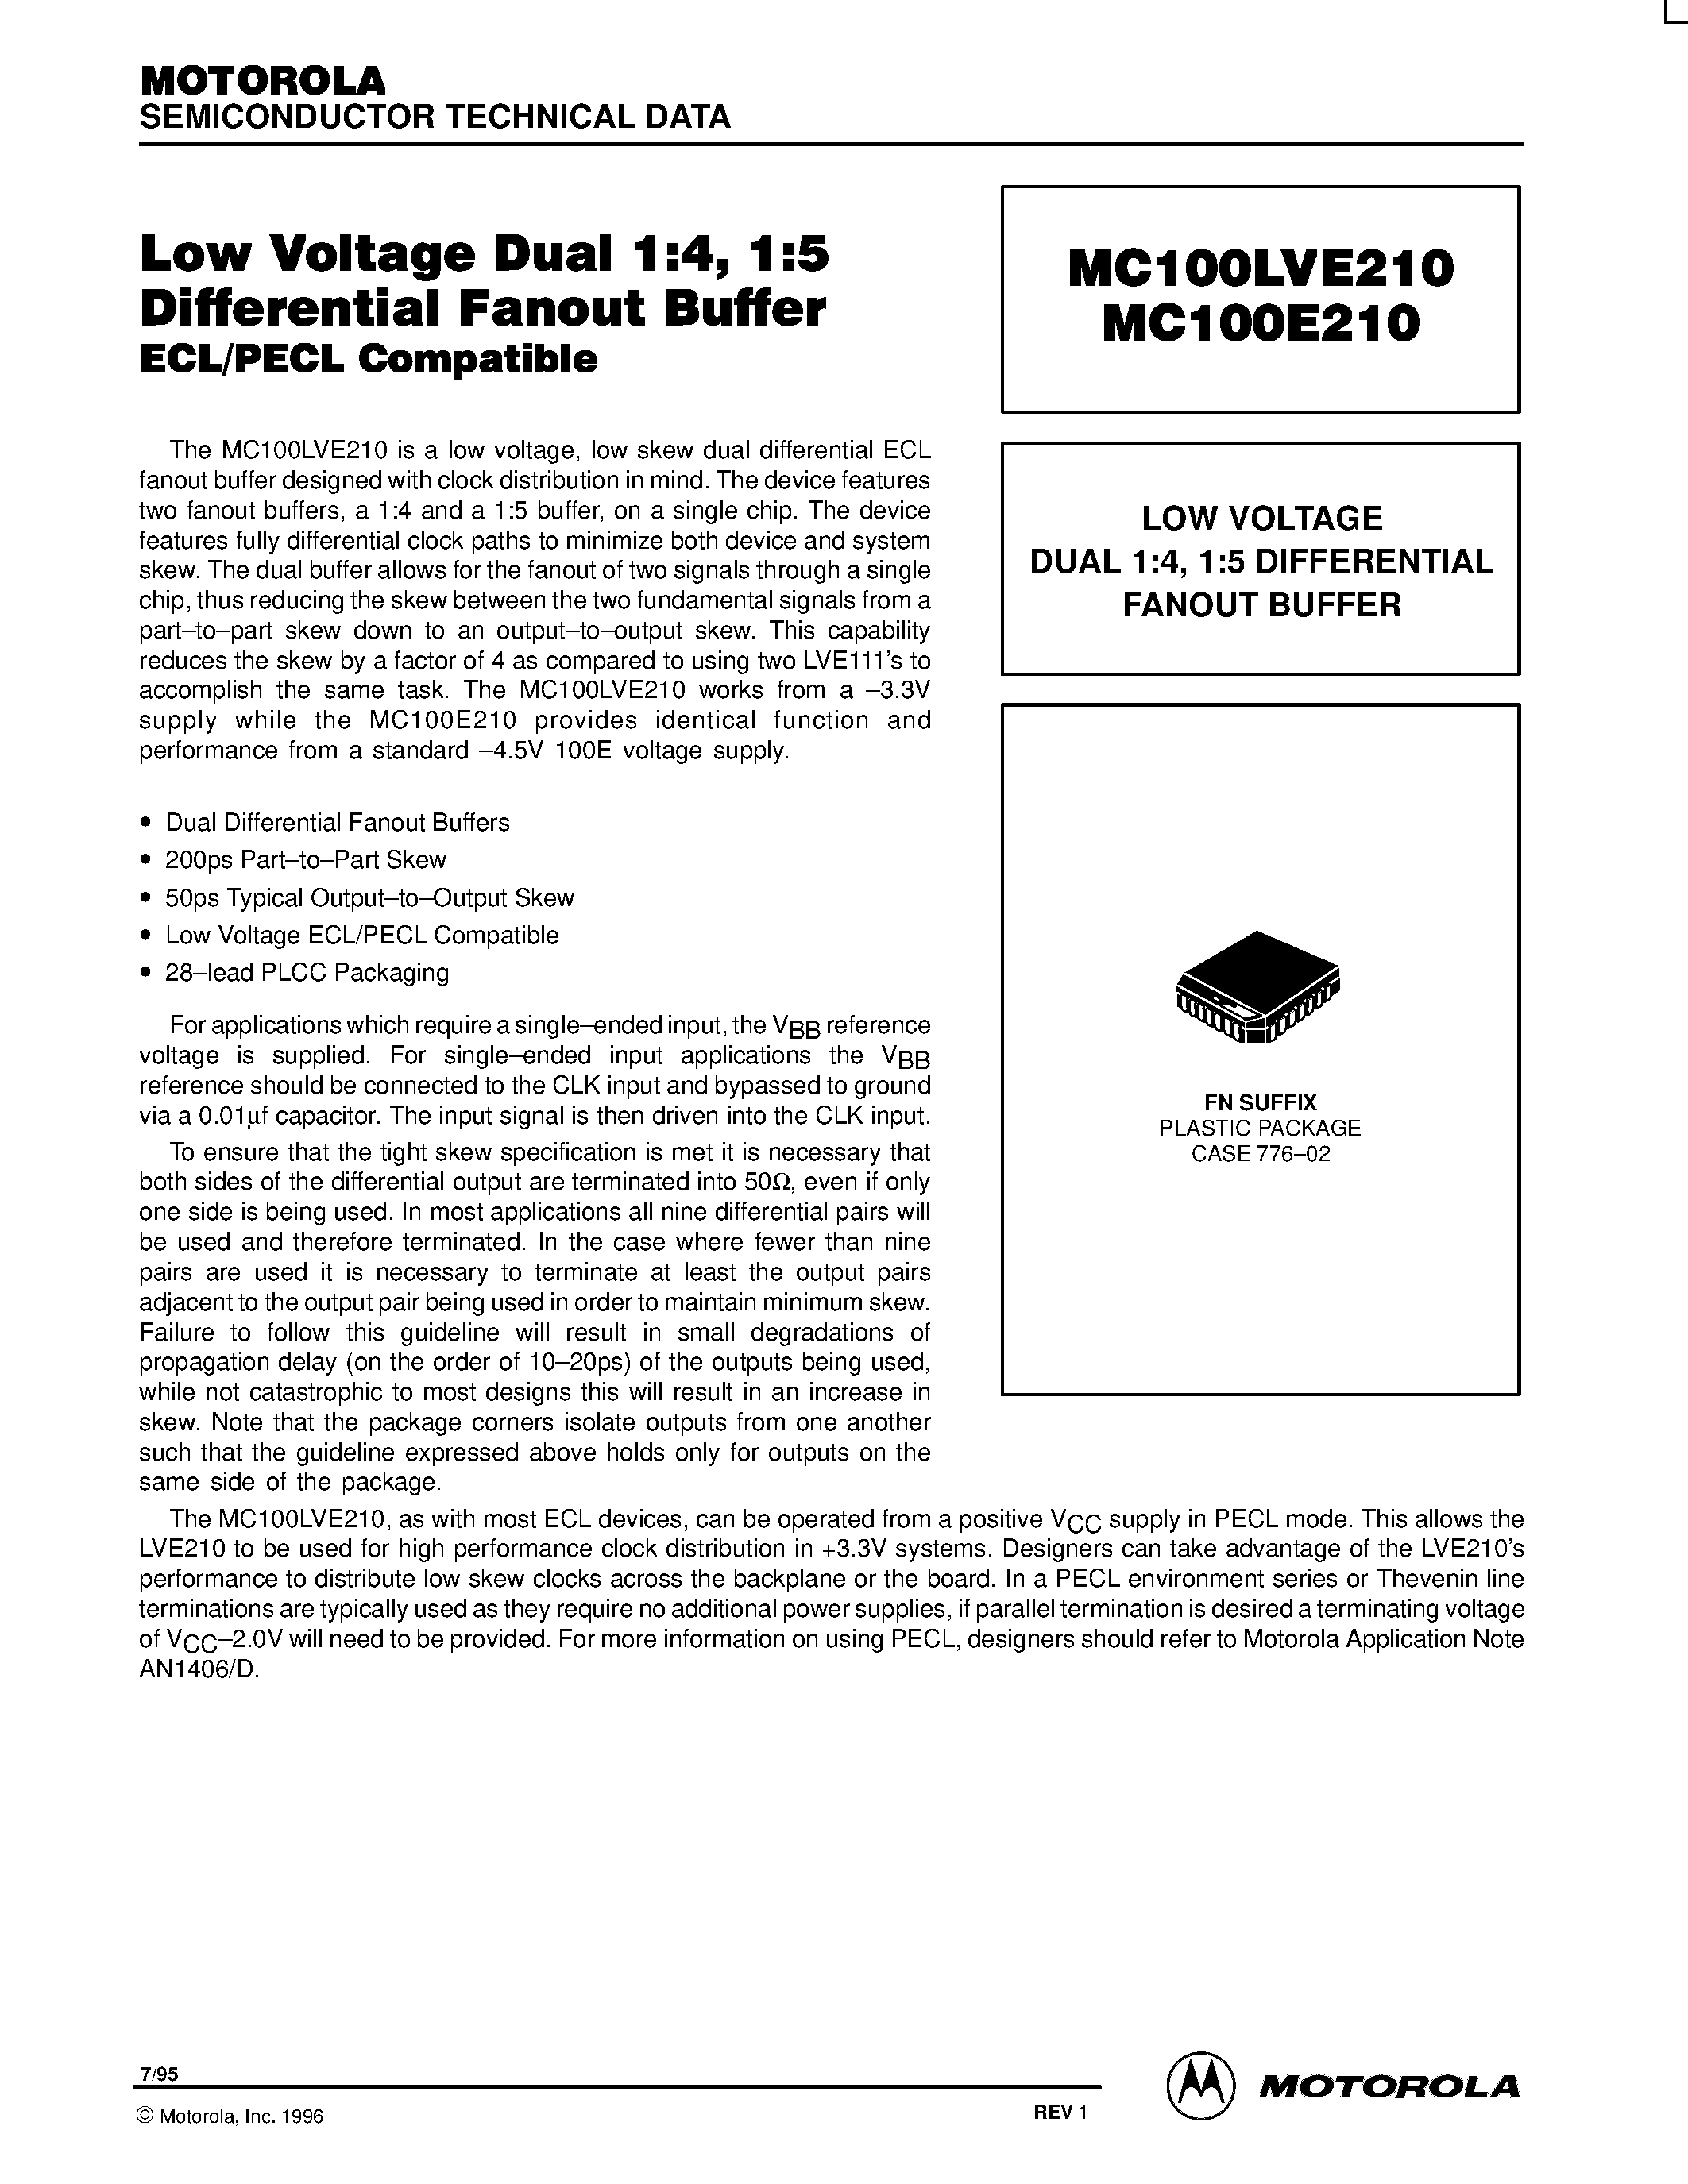 Datasheet MC100E210FN - LOW VOLTAGE DUAL 1:4 / 1:5 DIFFERENTIAL FANOUT BUFFER page 1